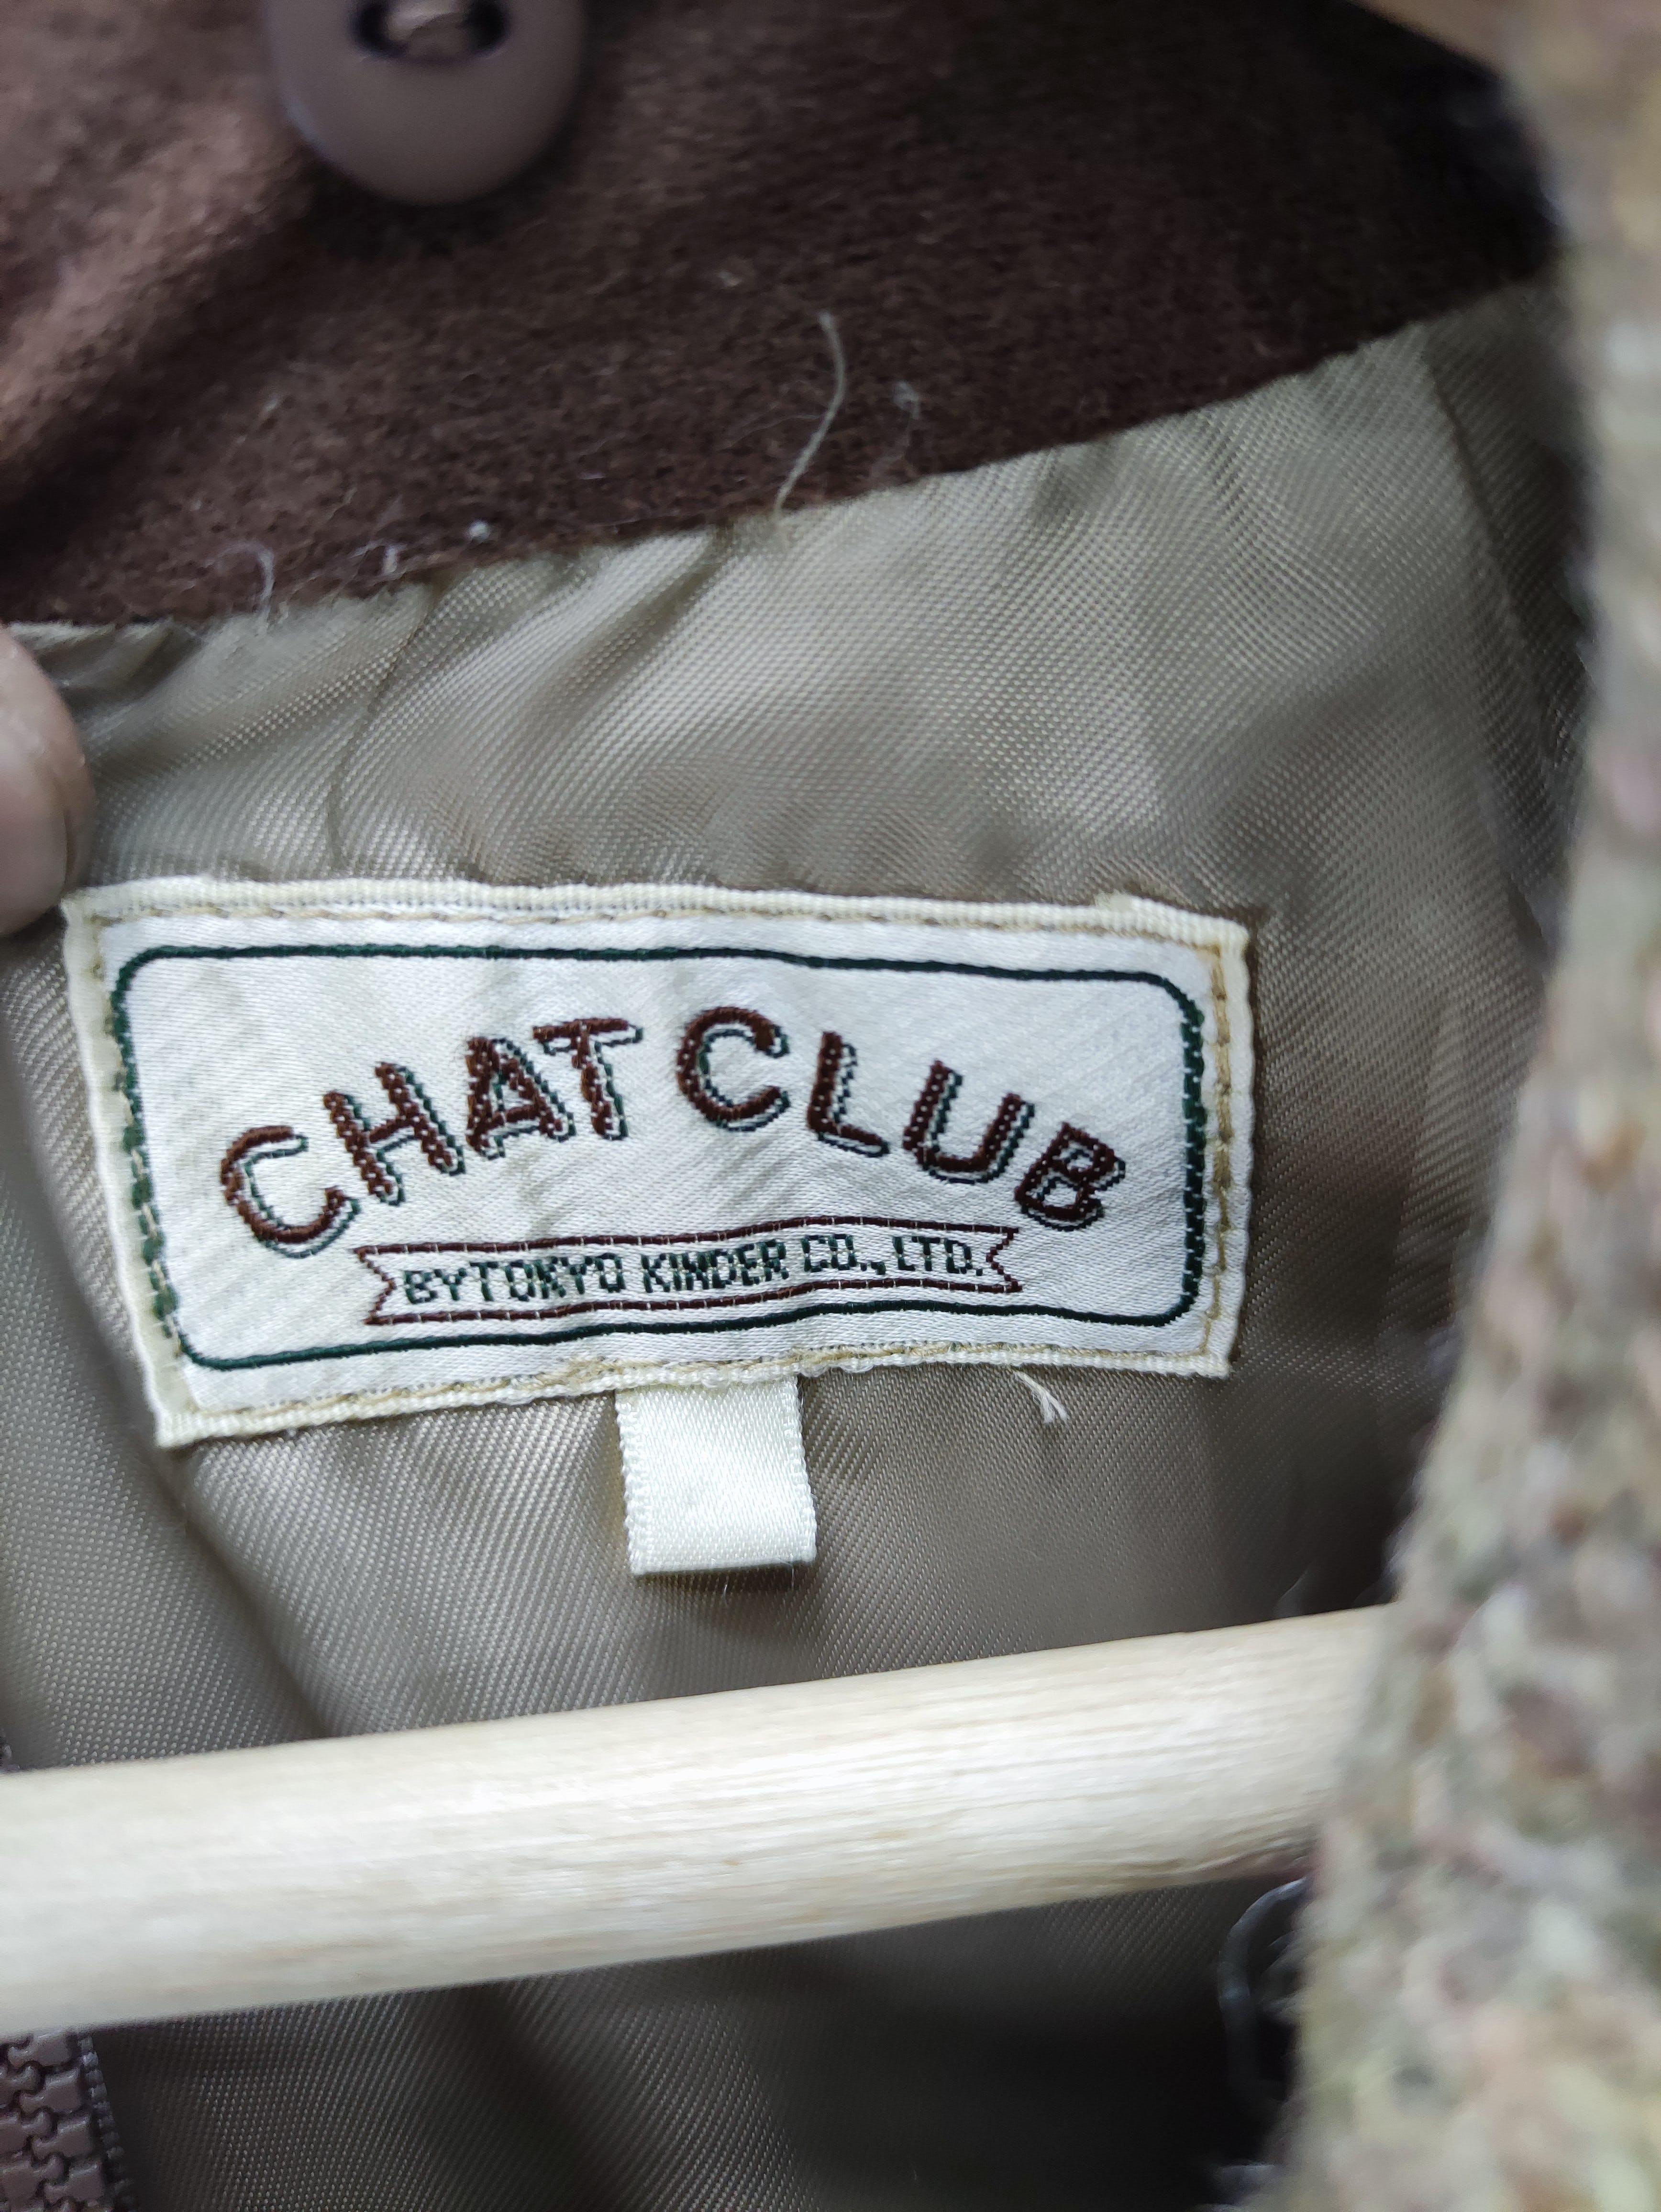 Vintage Wool Jacket Button Up Zipper By Chat Club - 2